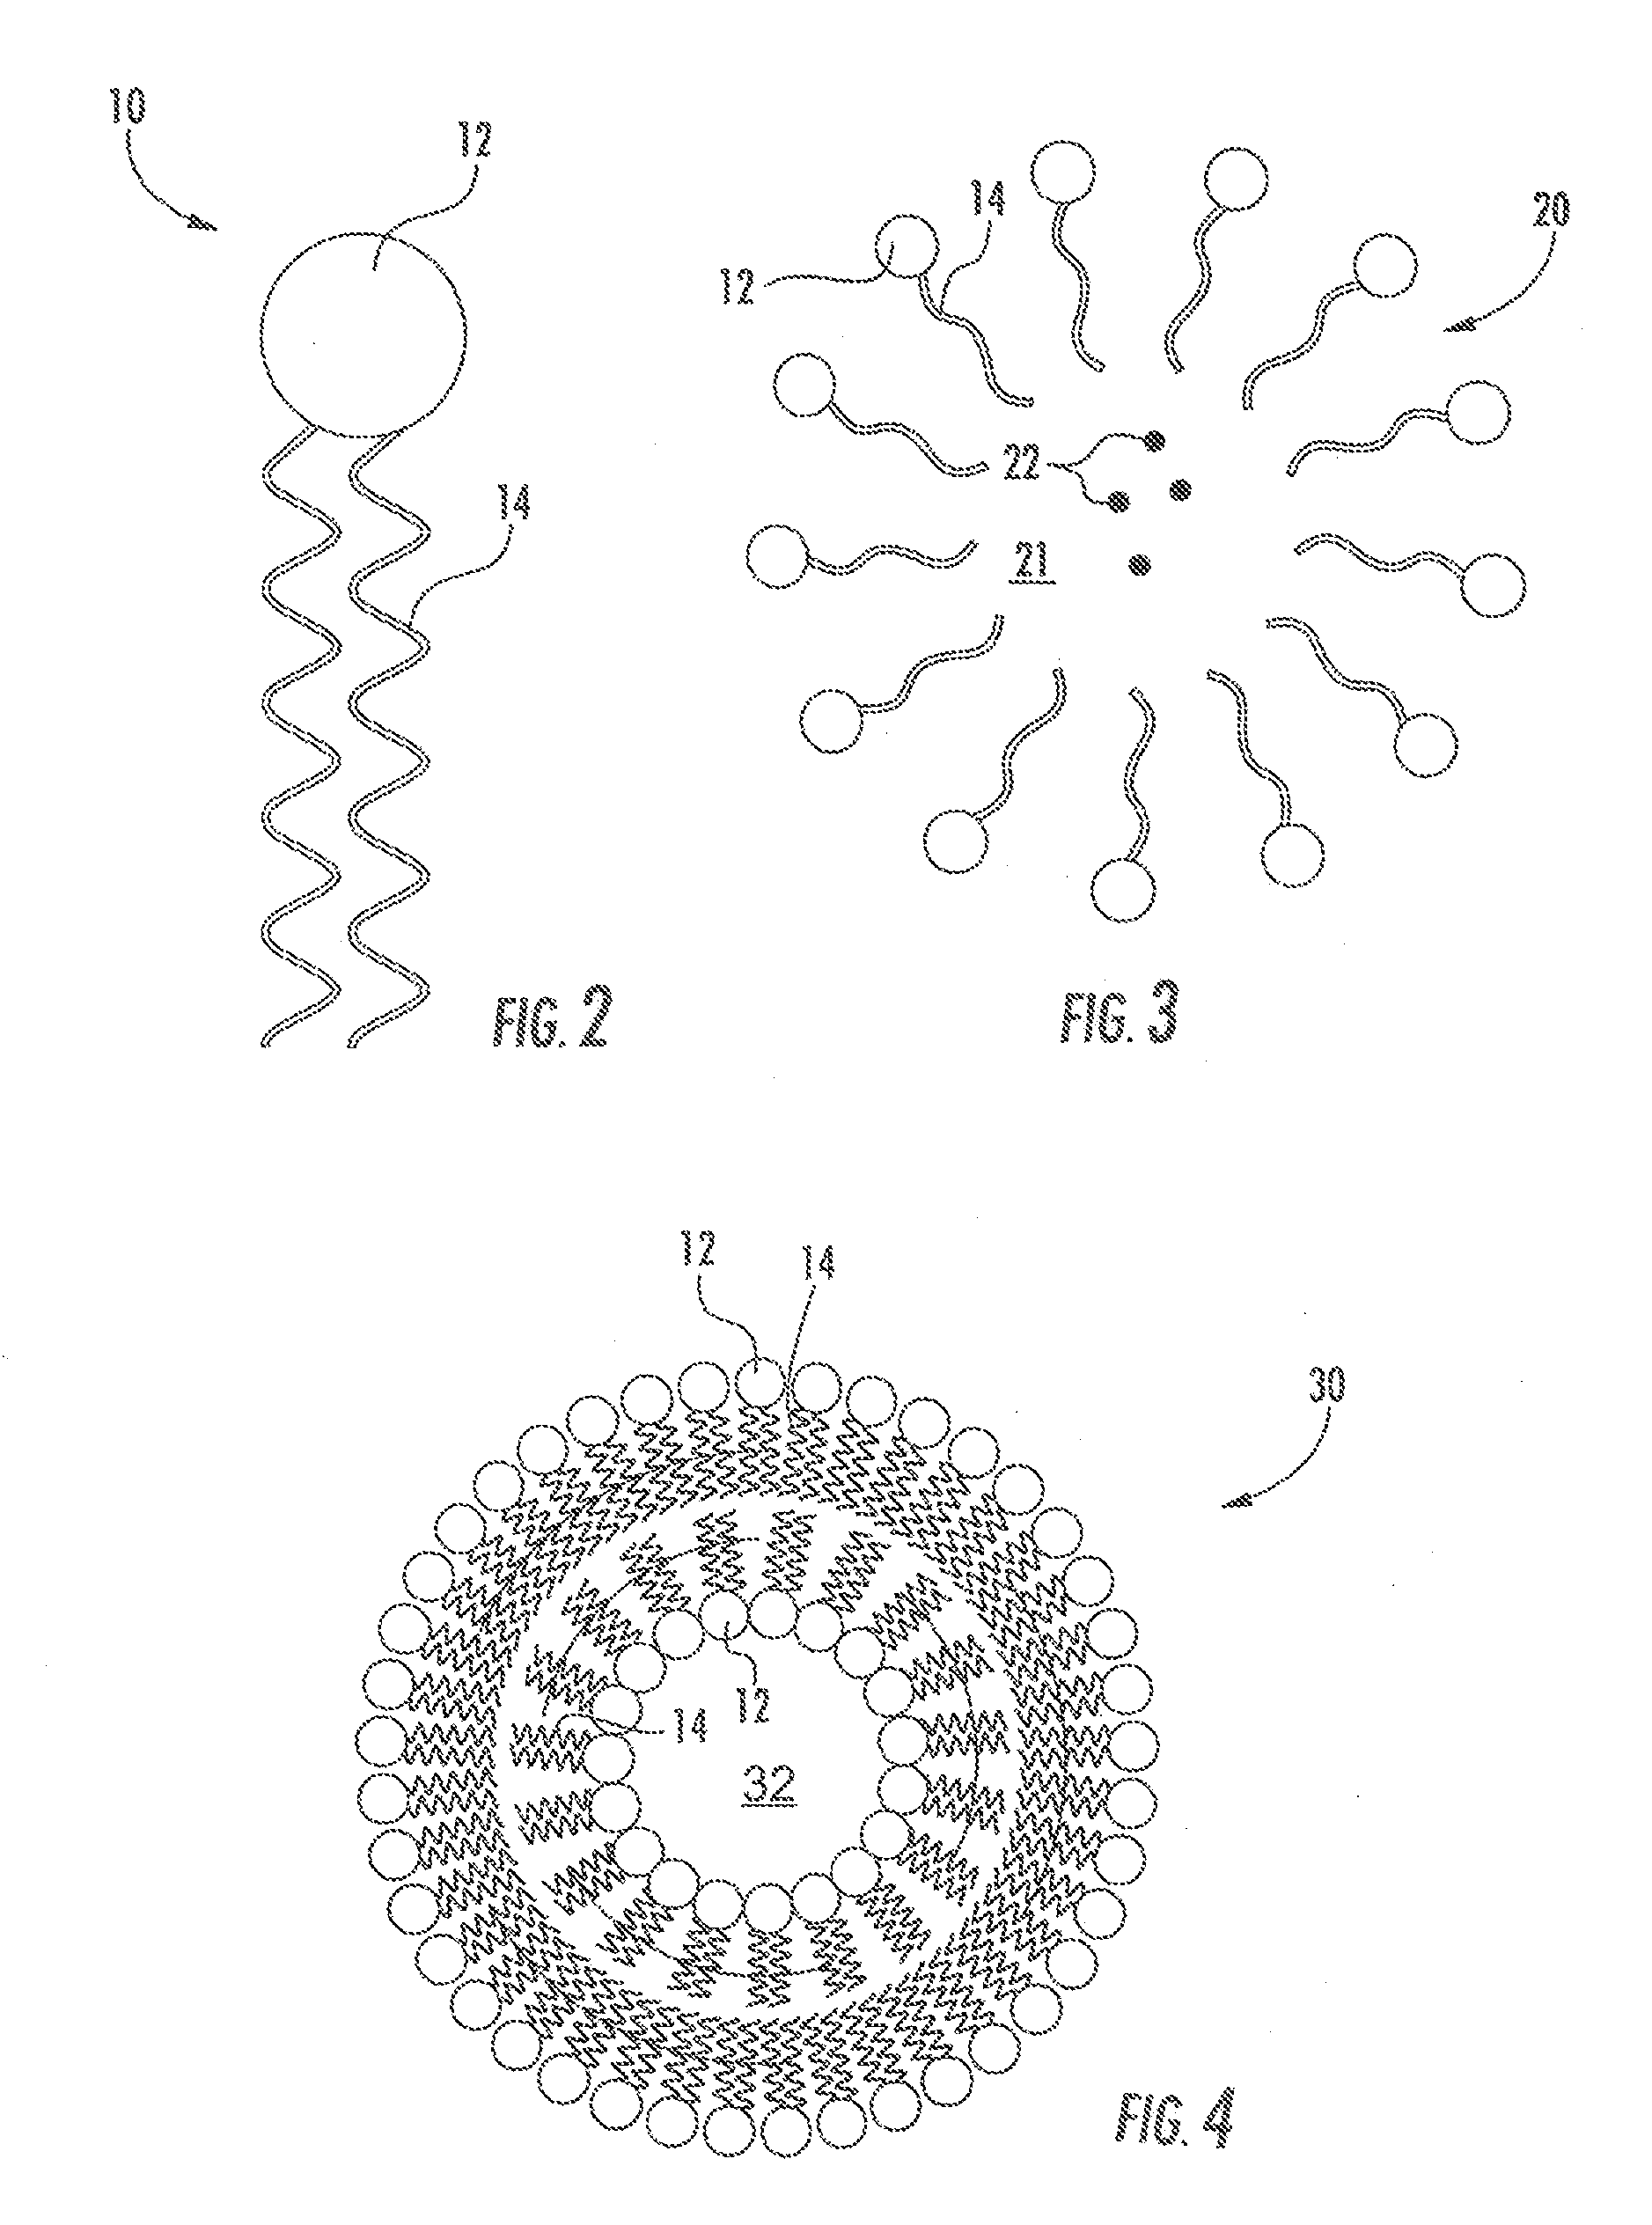 Chemical Treatments for the Disruption of Dental Plaque Biofilms and Related Methods